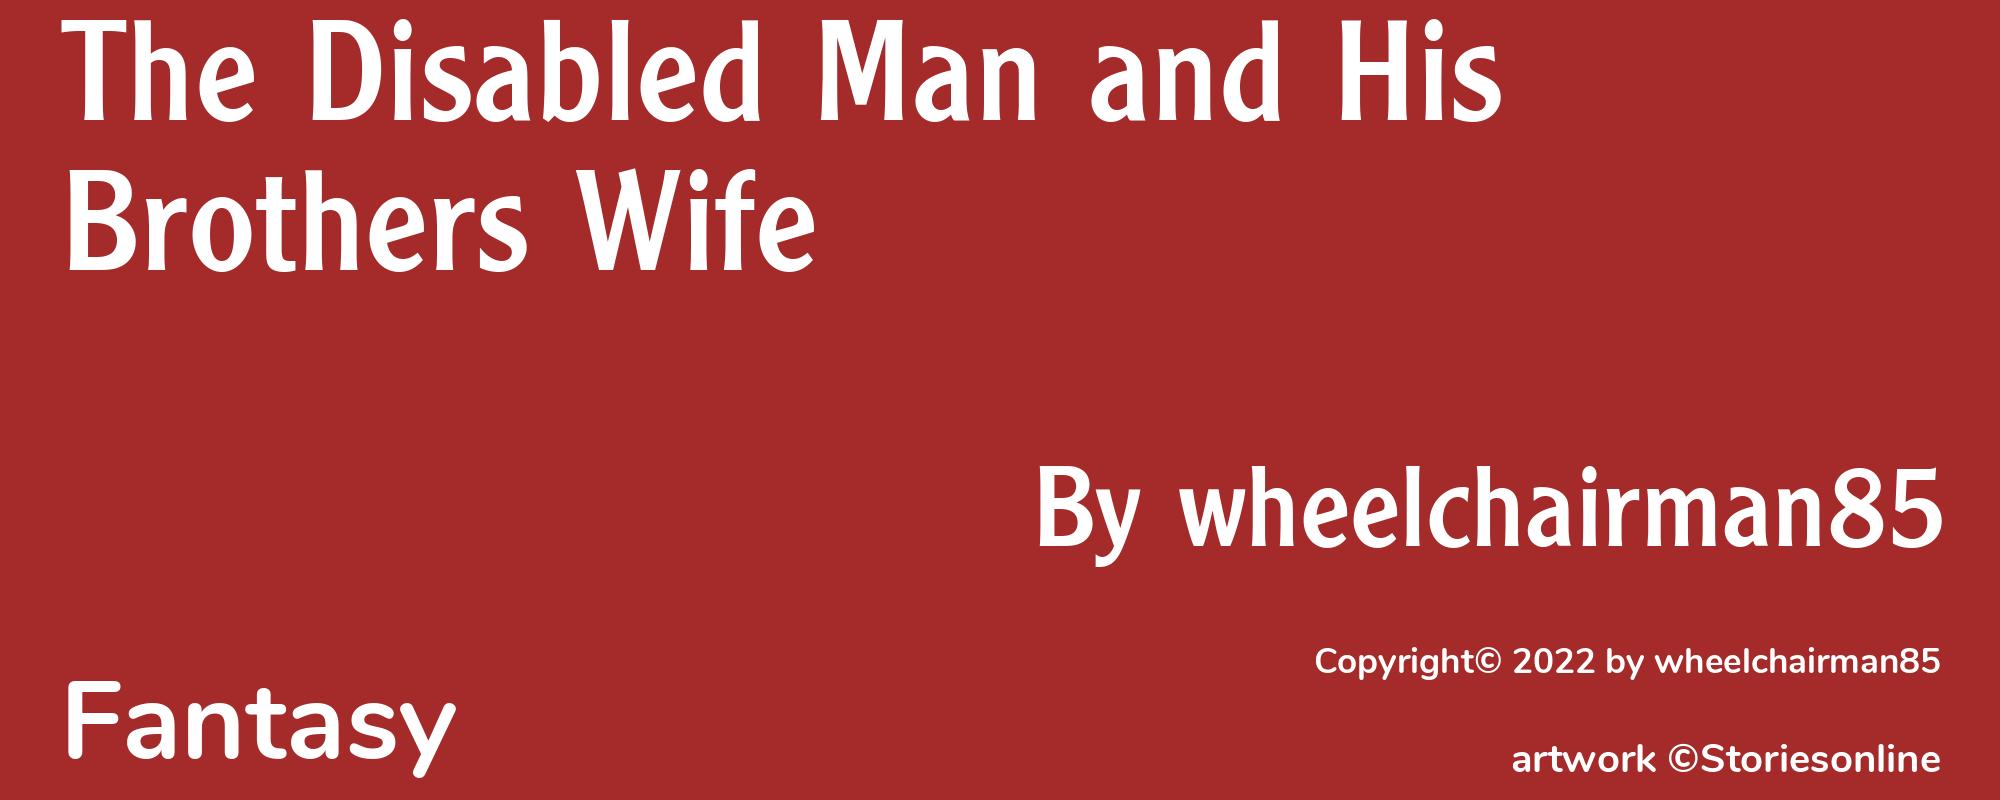 The Disabled Man and His Brothers Wife - Cover